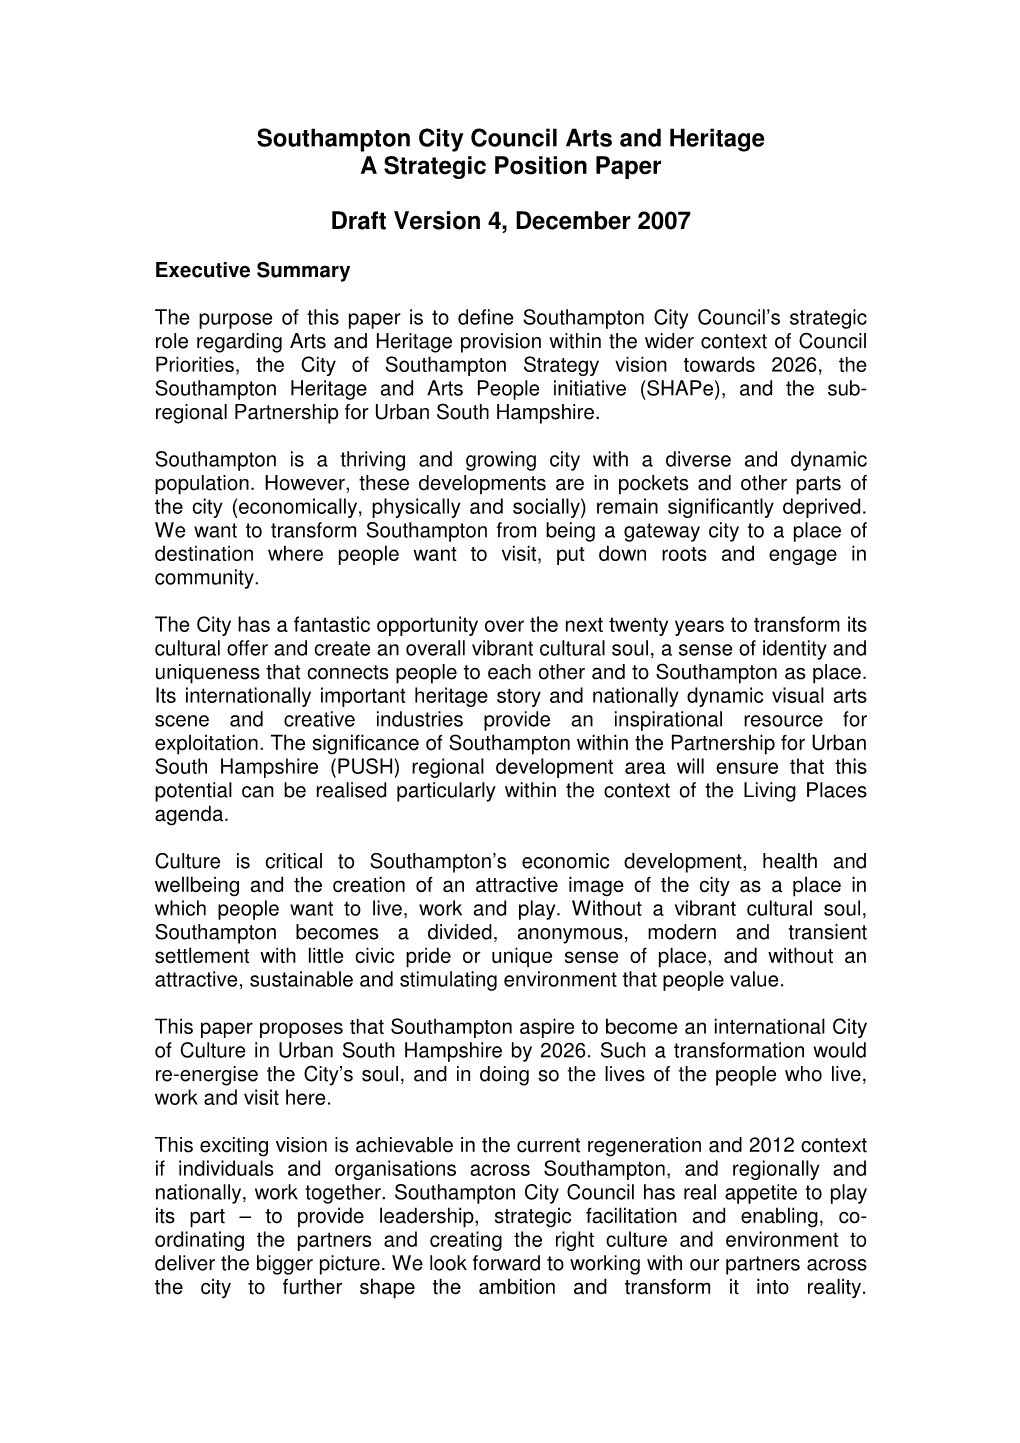 Southampton City Council Arts and Heritage a Strategic Position Paper Draft Version 4, December 2007